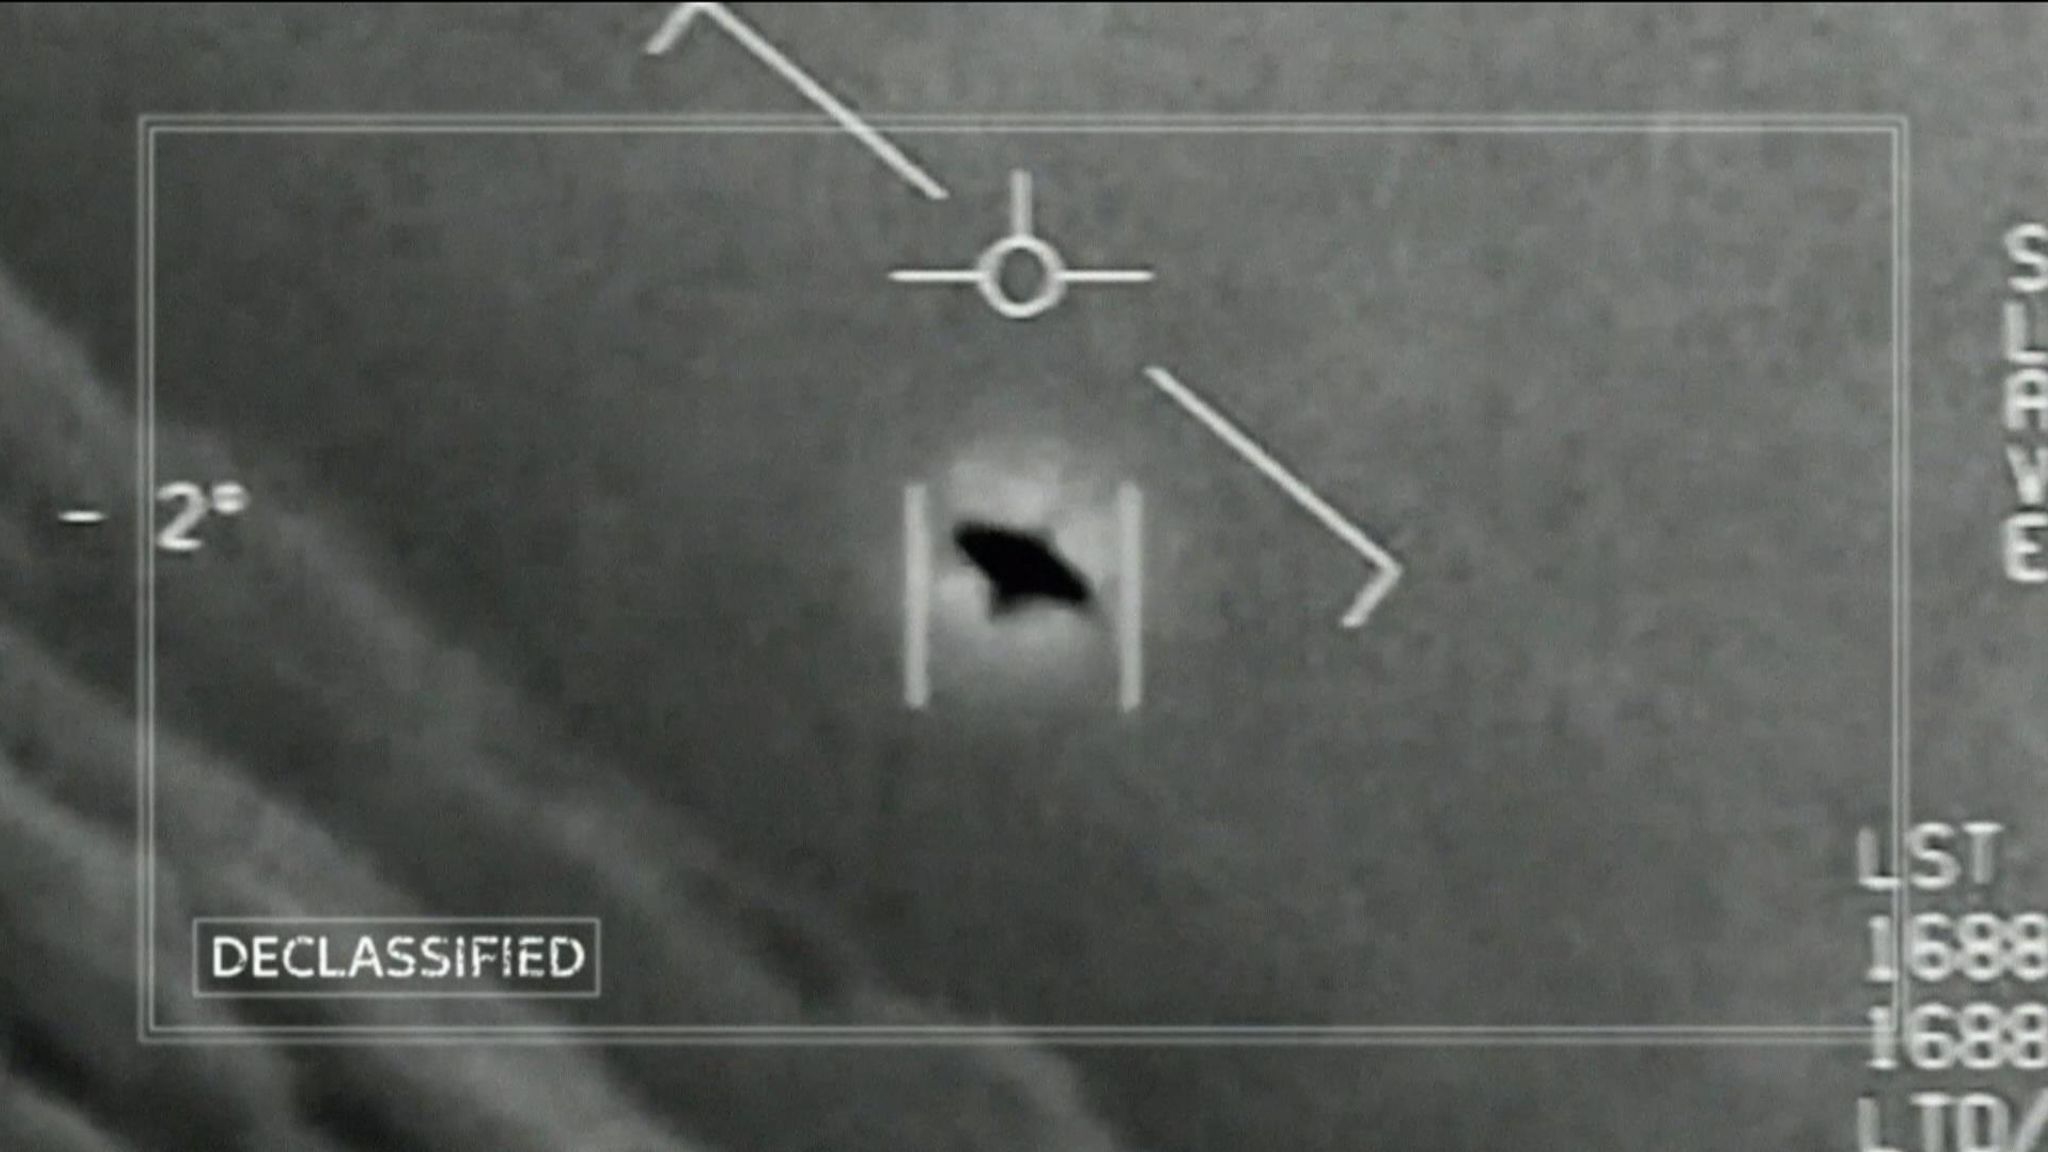 How to Watch UFOs Declassified: Live Without Cable on June 30